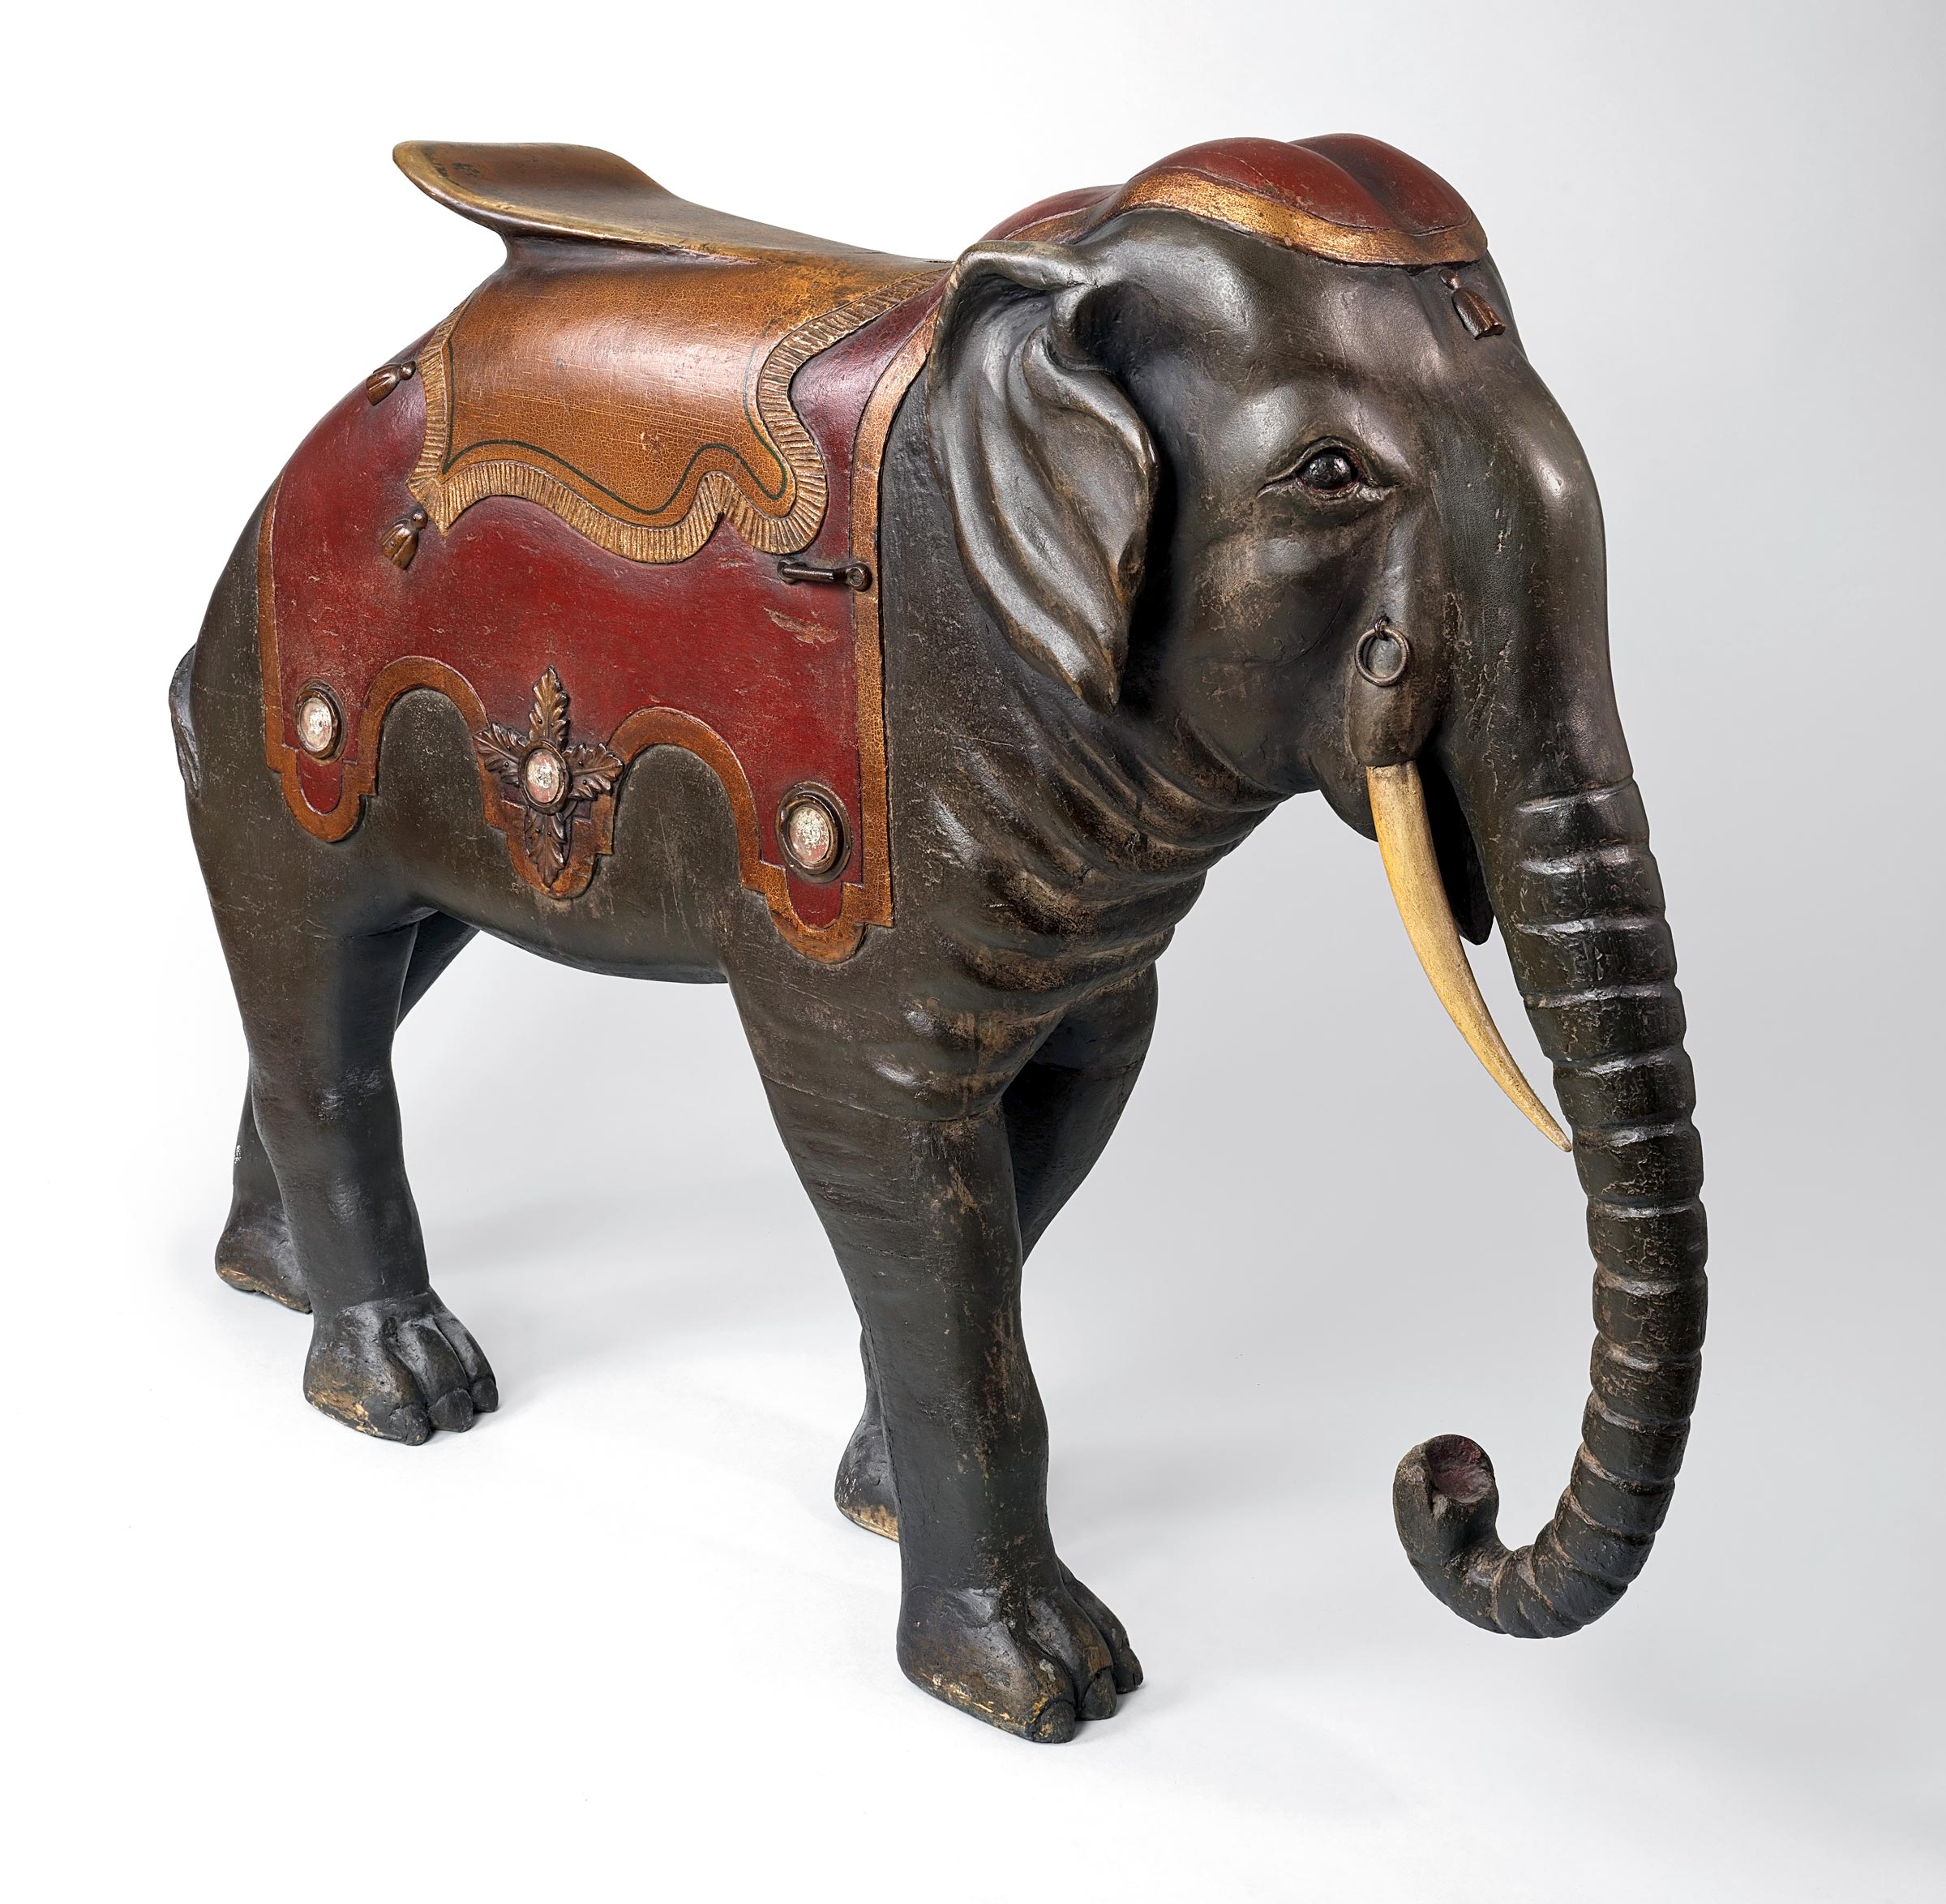 Attributed to Charles I. D. Looff Carrousel Manufacturers, Elephant